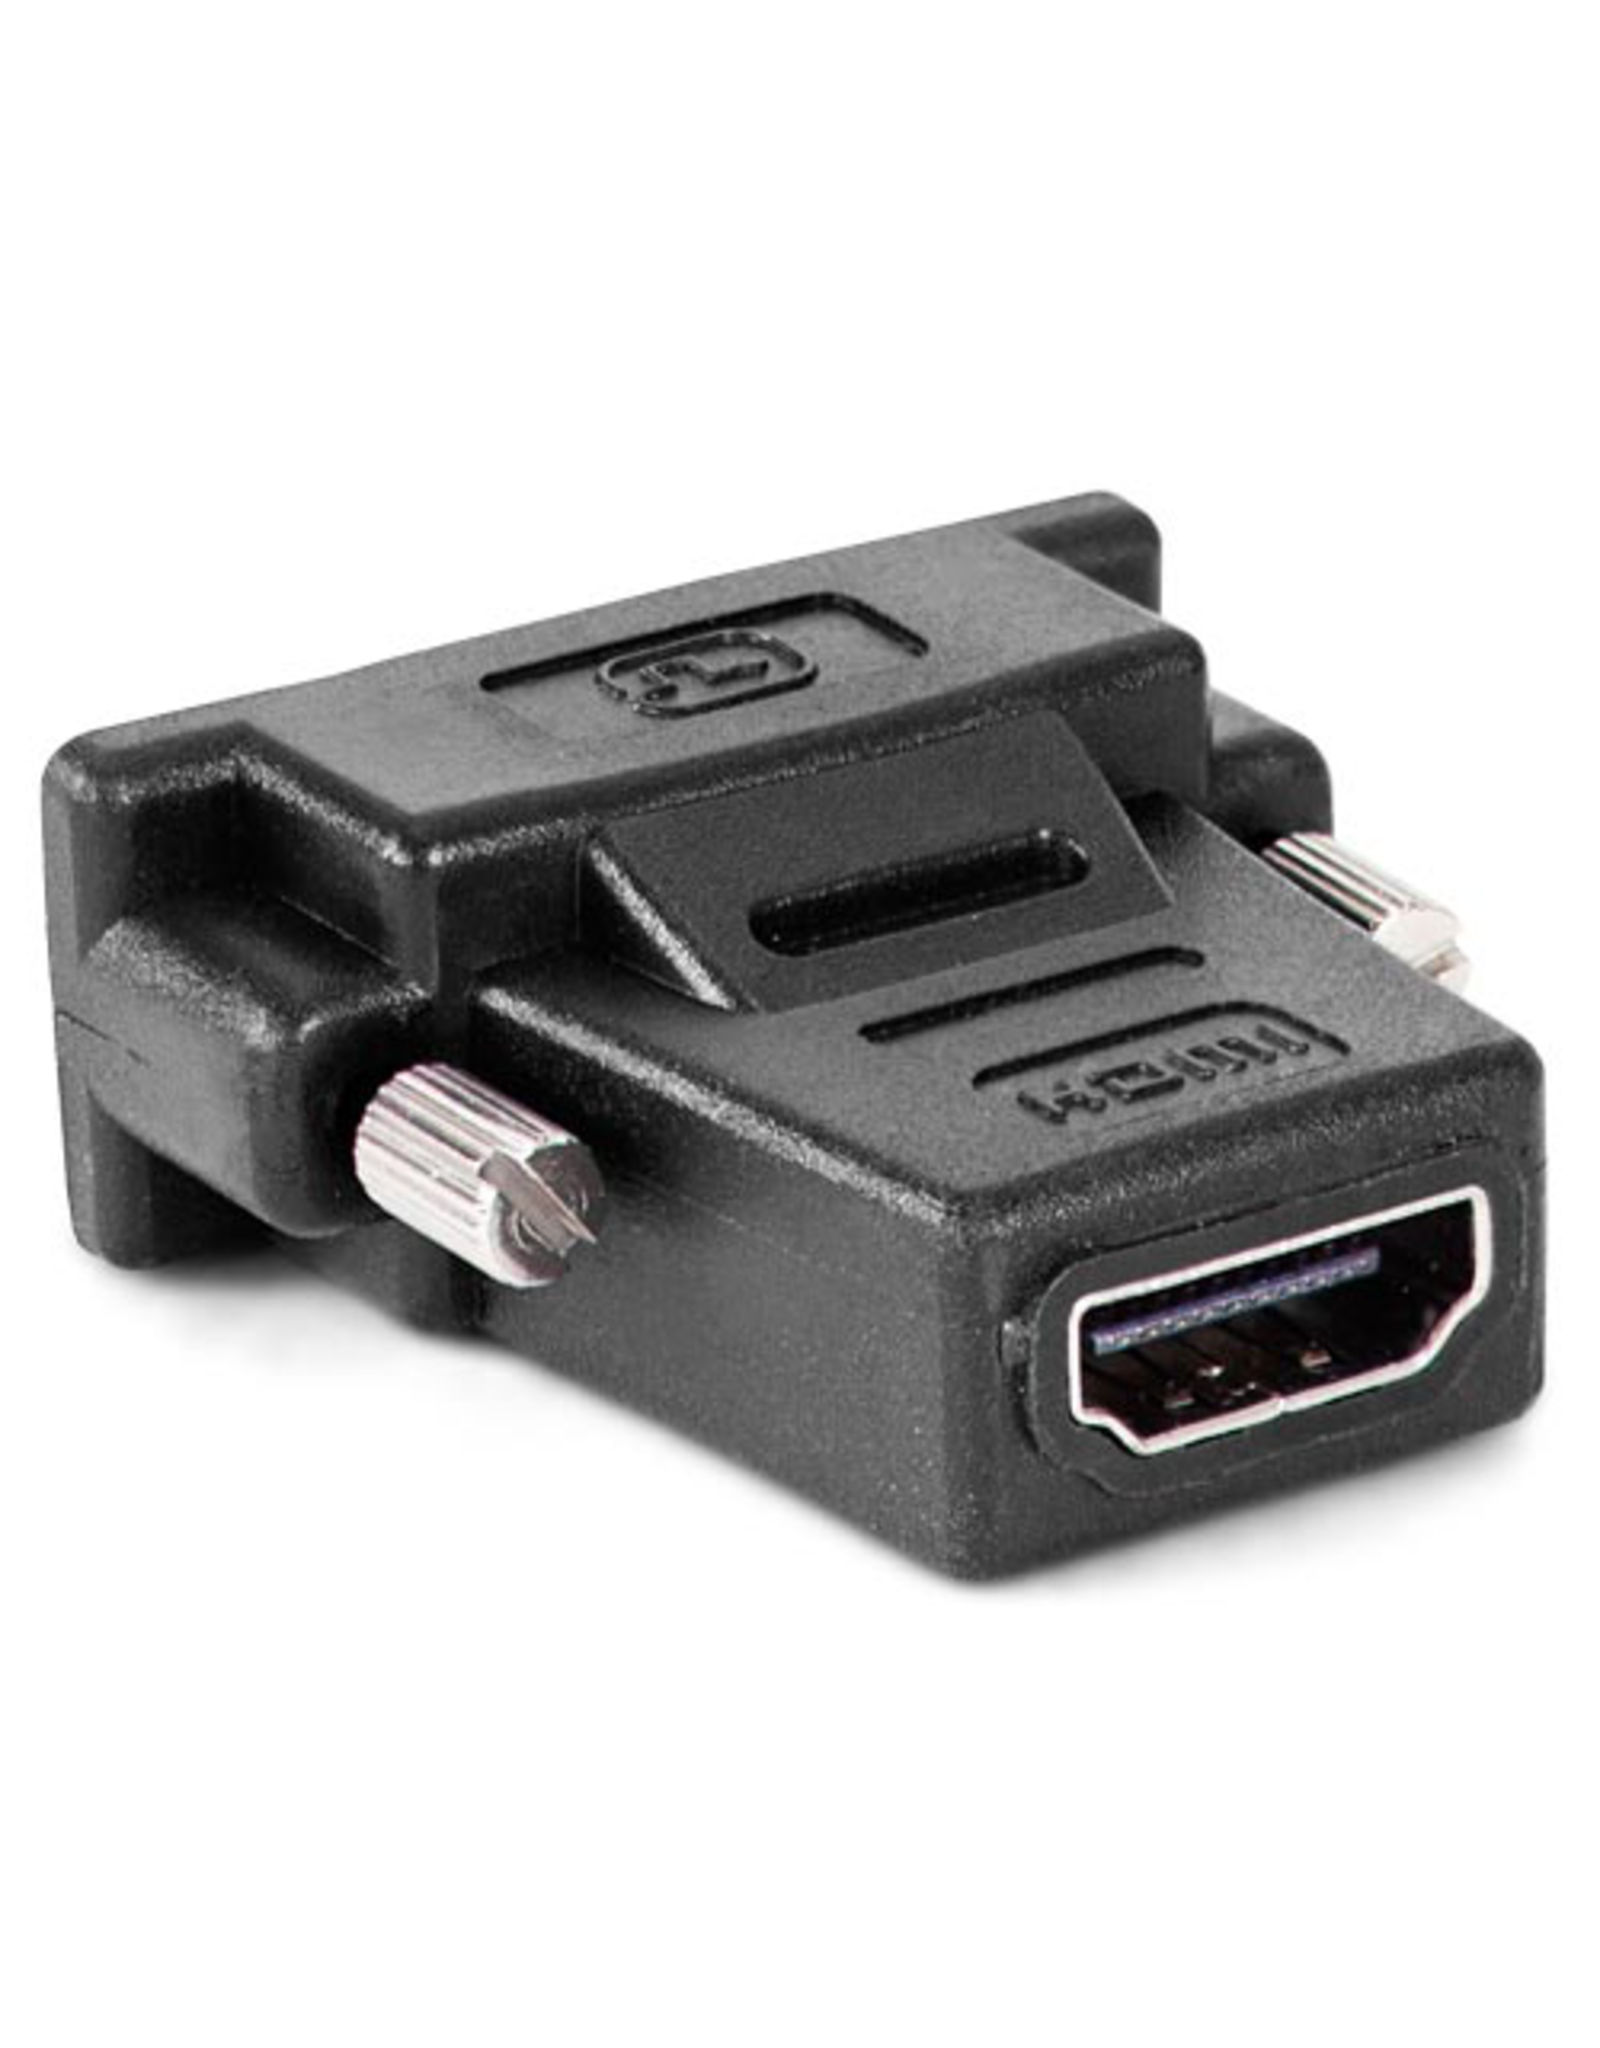 Newertech NewerTech USB 3.0/2.0 to DVI/VGA/HDMI Video Display Adapter compatible with OSX10.6 and later